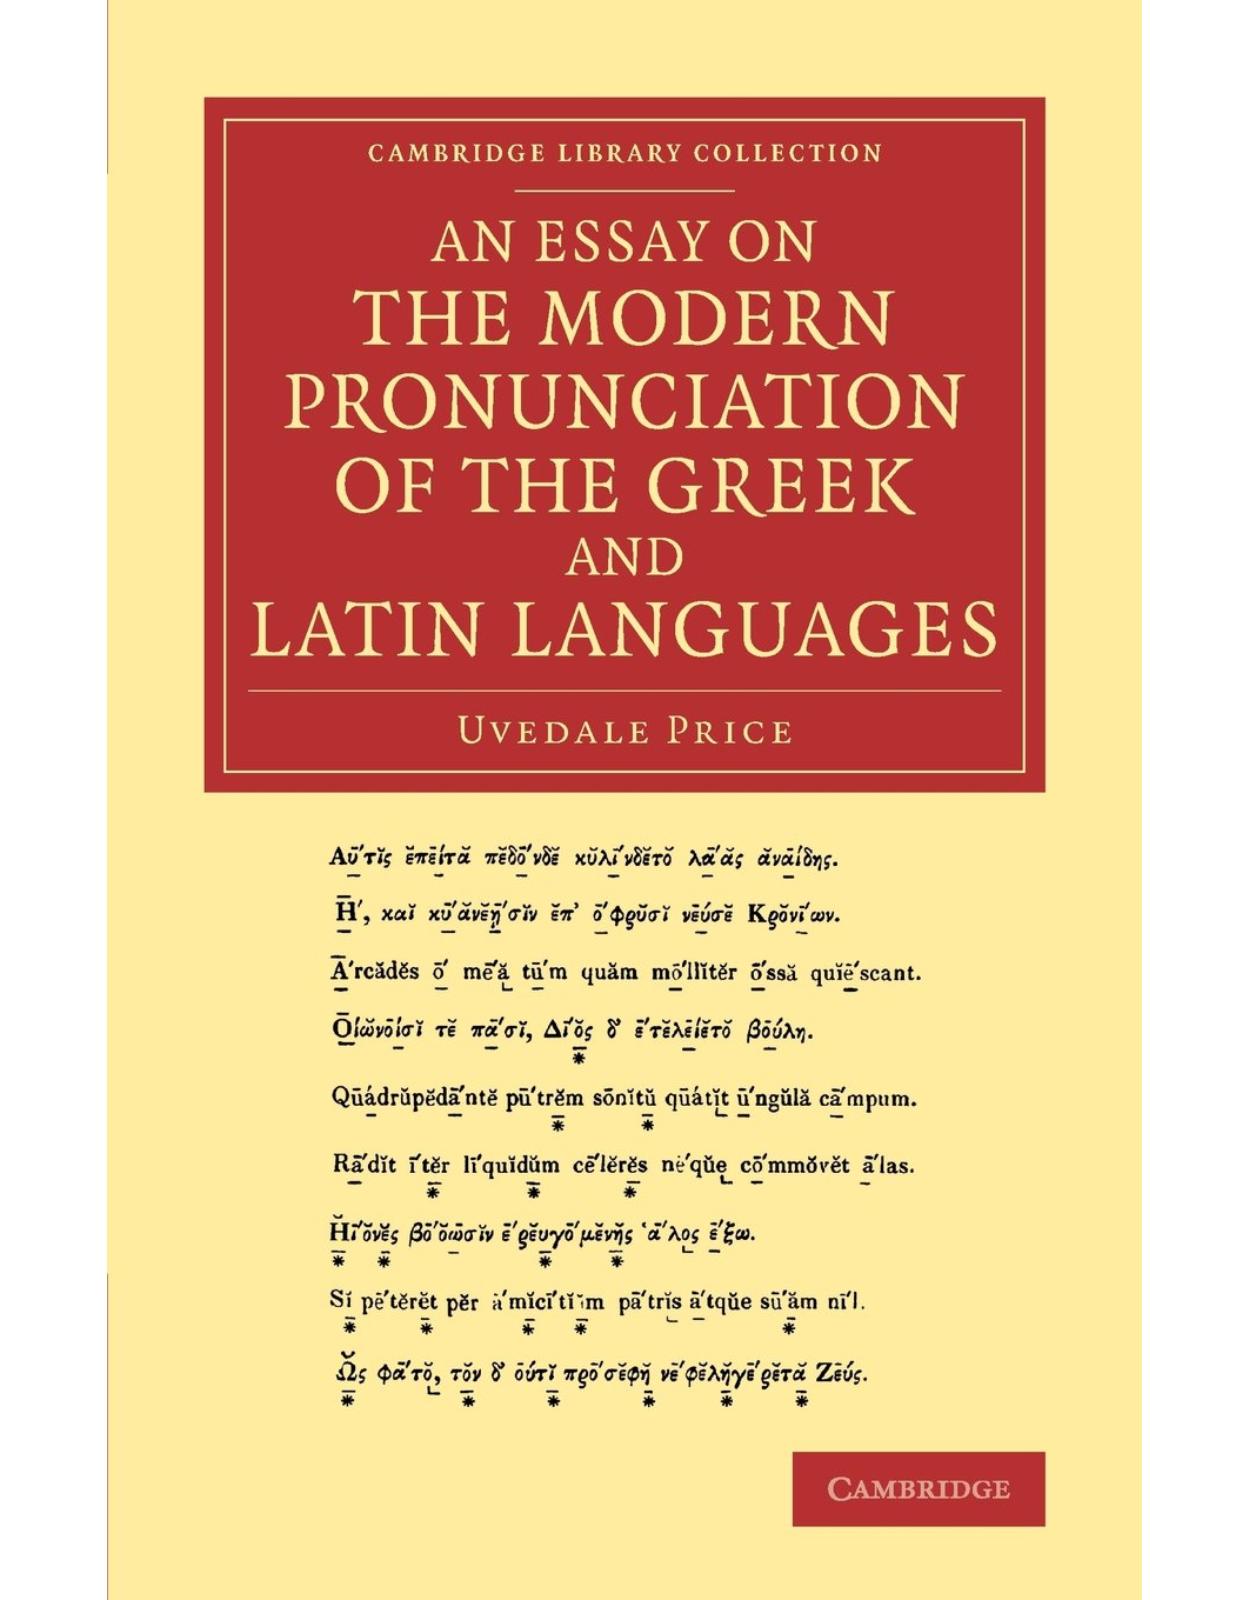 An Essay on the Modern Pronunciation of the Greek and Latin Languages (Cambridge Library Collection - Classics)